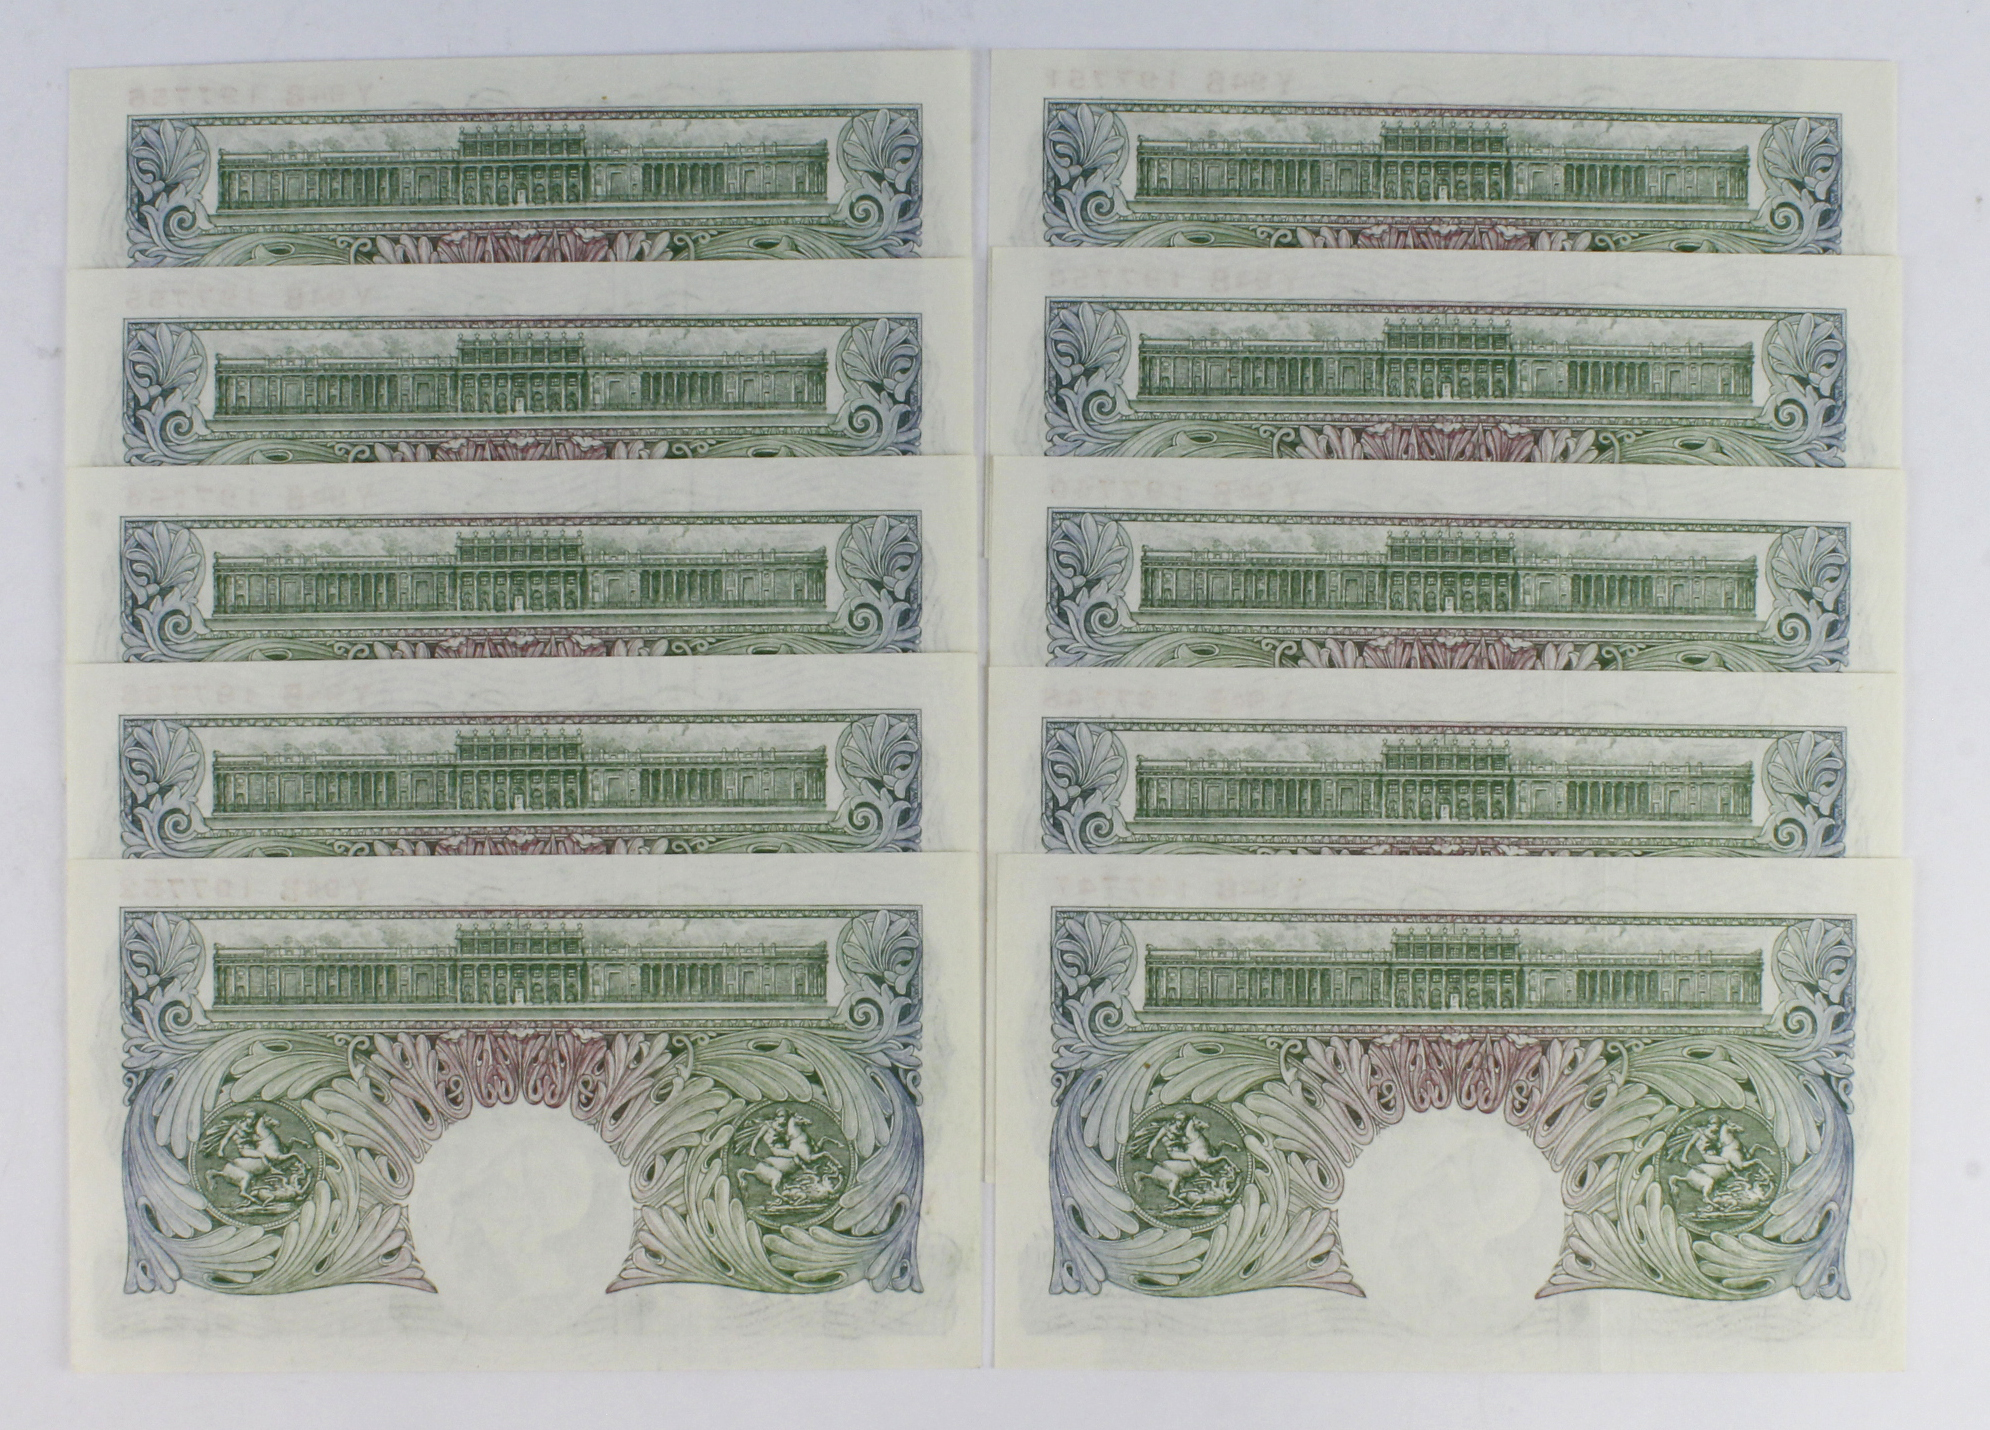 Beale 1 Pound (B268) issued 1950 (10), a consecutively numbered run, serial Y94B 197747 - Y94B - Image 2 of 2